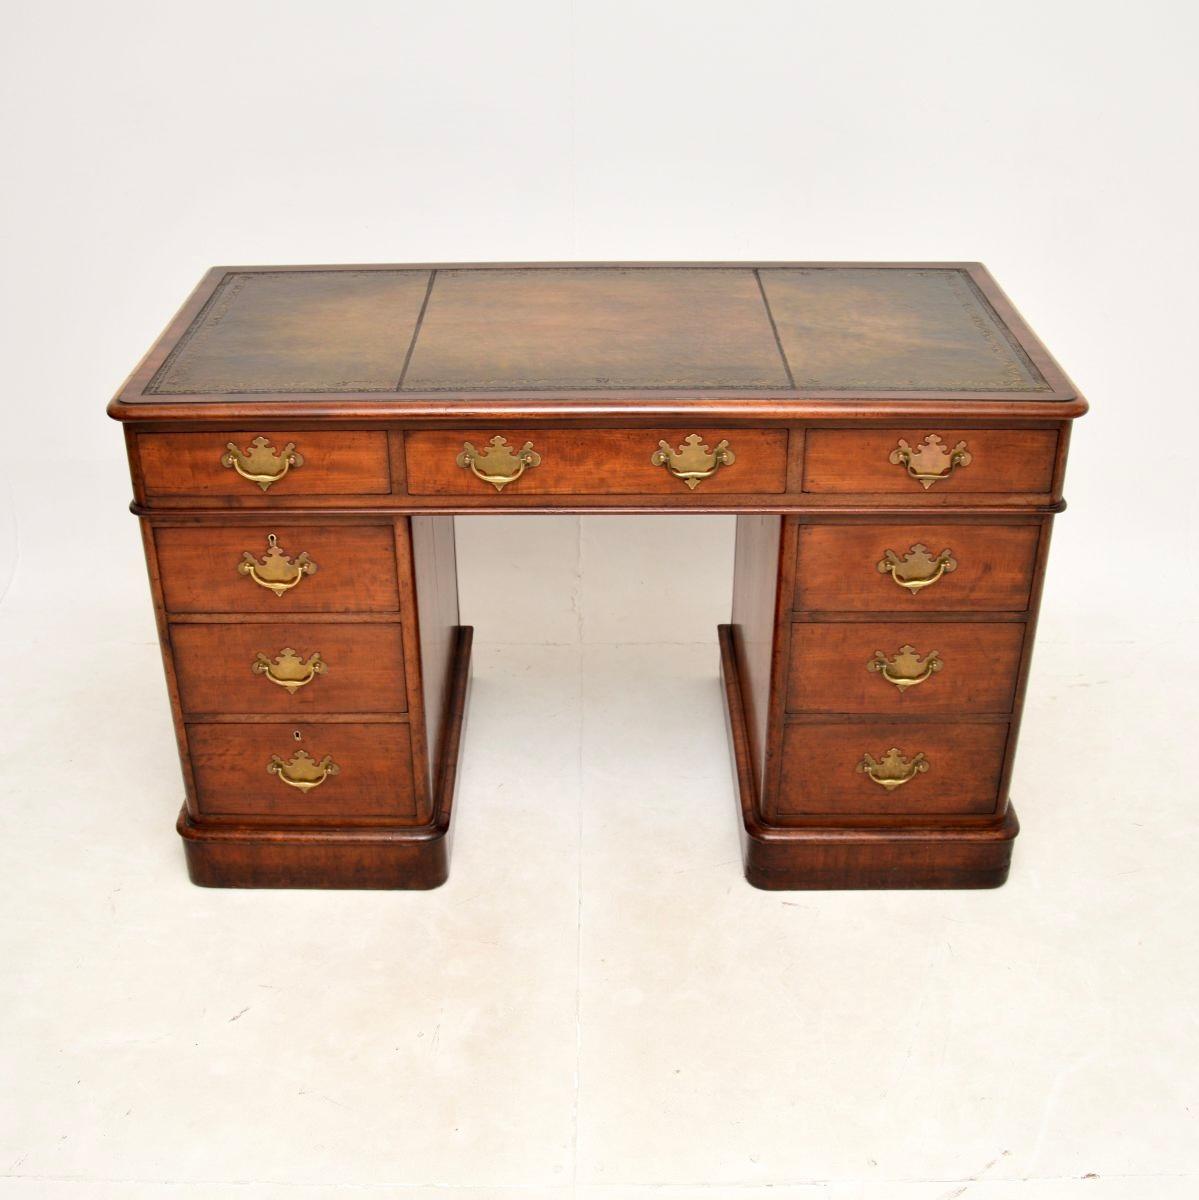 A smart and very useful antique Victorian  leather top pedestal desk. This was made in England, it dates from the 1860-1880 period.

This is of extremely fine quality, it was made by George & Co and has the makers mark stamped in the drawer. The